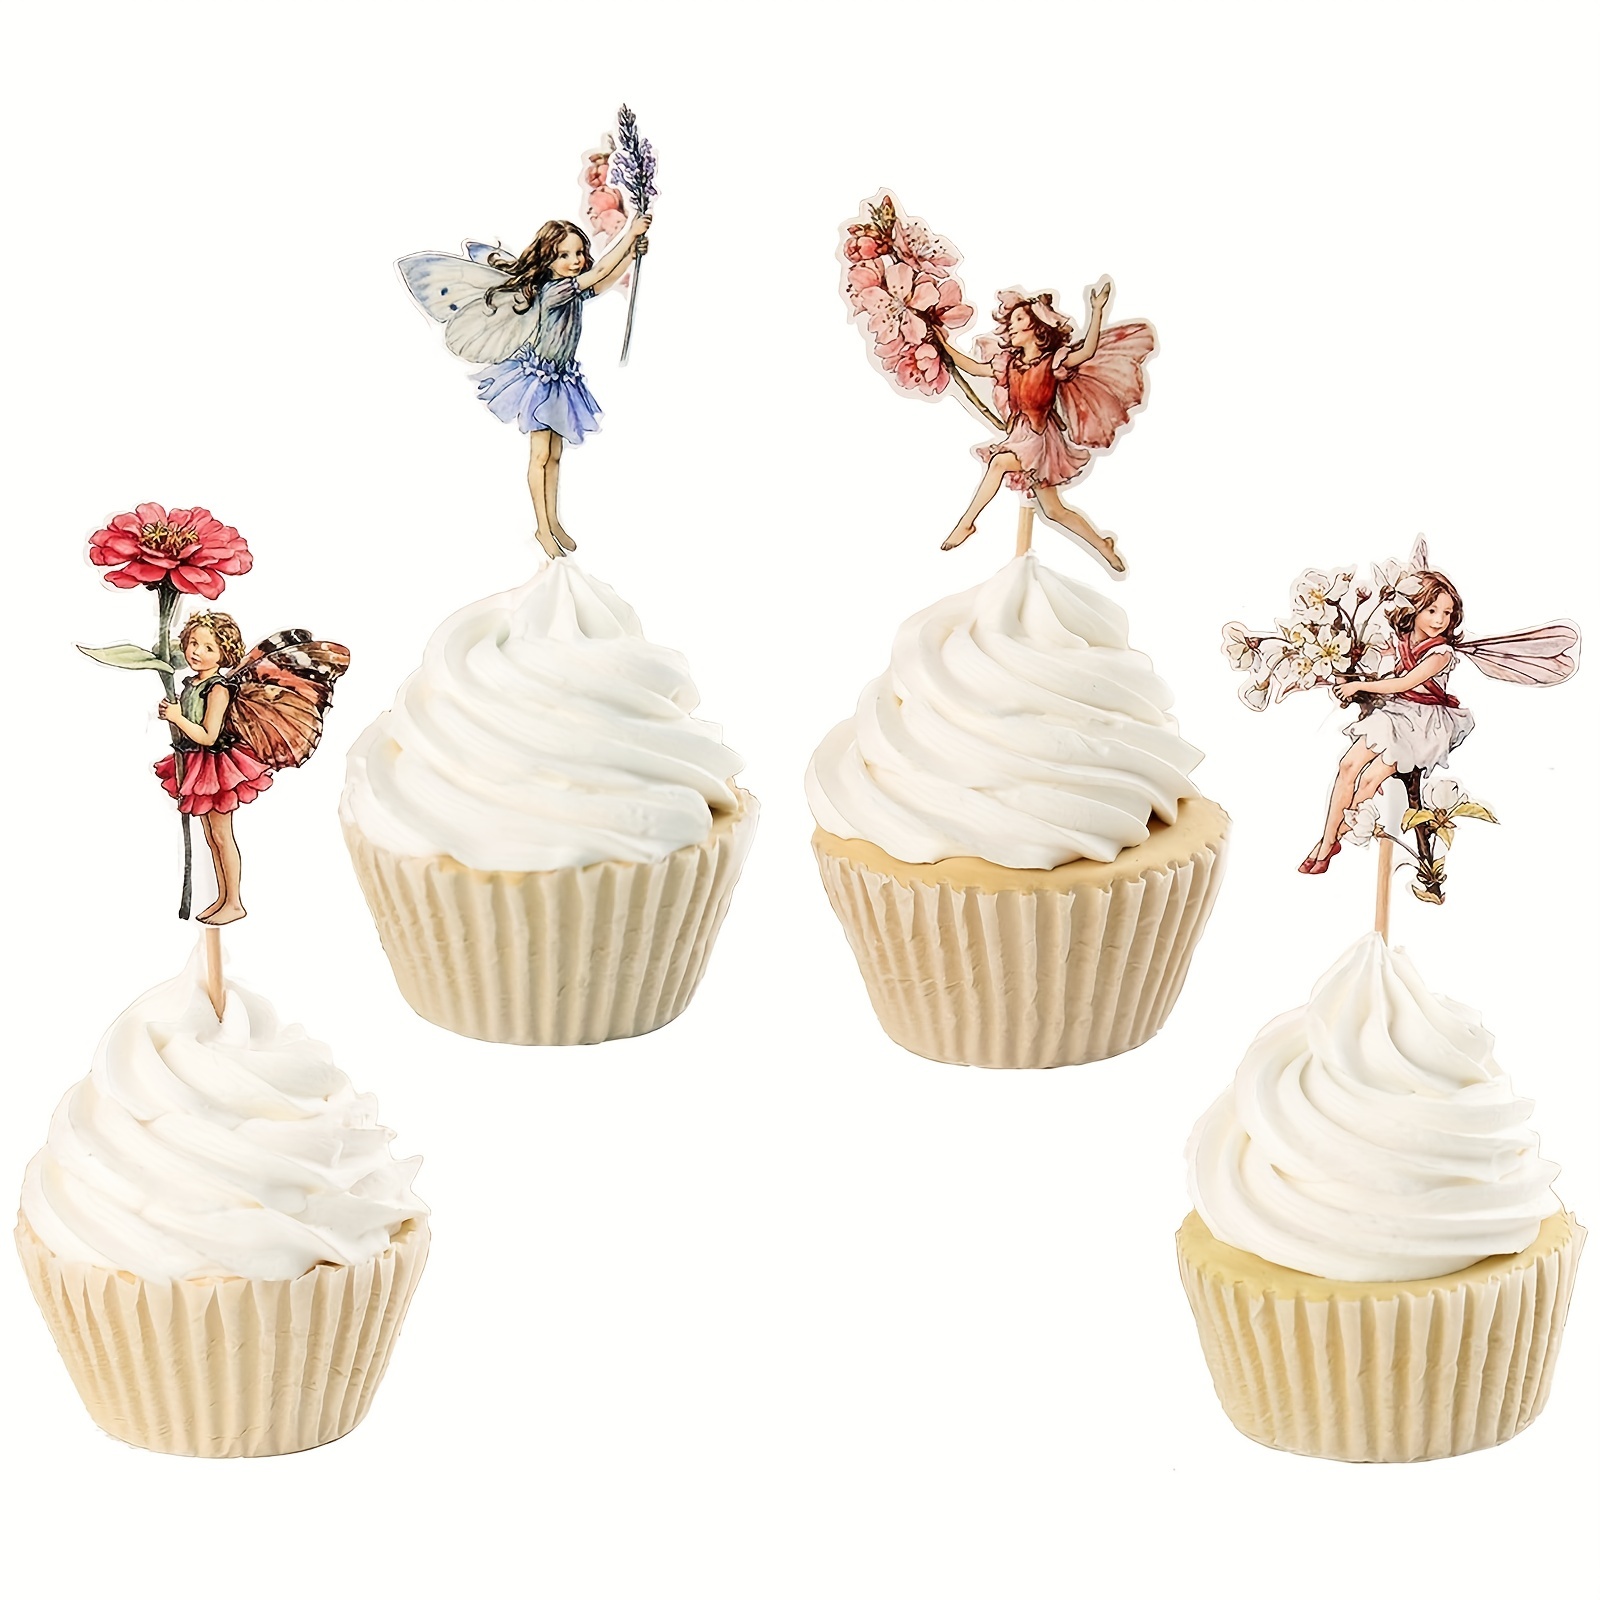 Line Dancing / Square Dance - 36 Edible Cupcake Toppers Fairy Cake